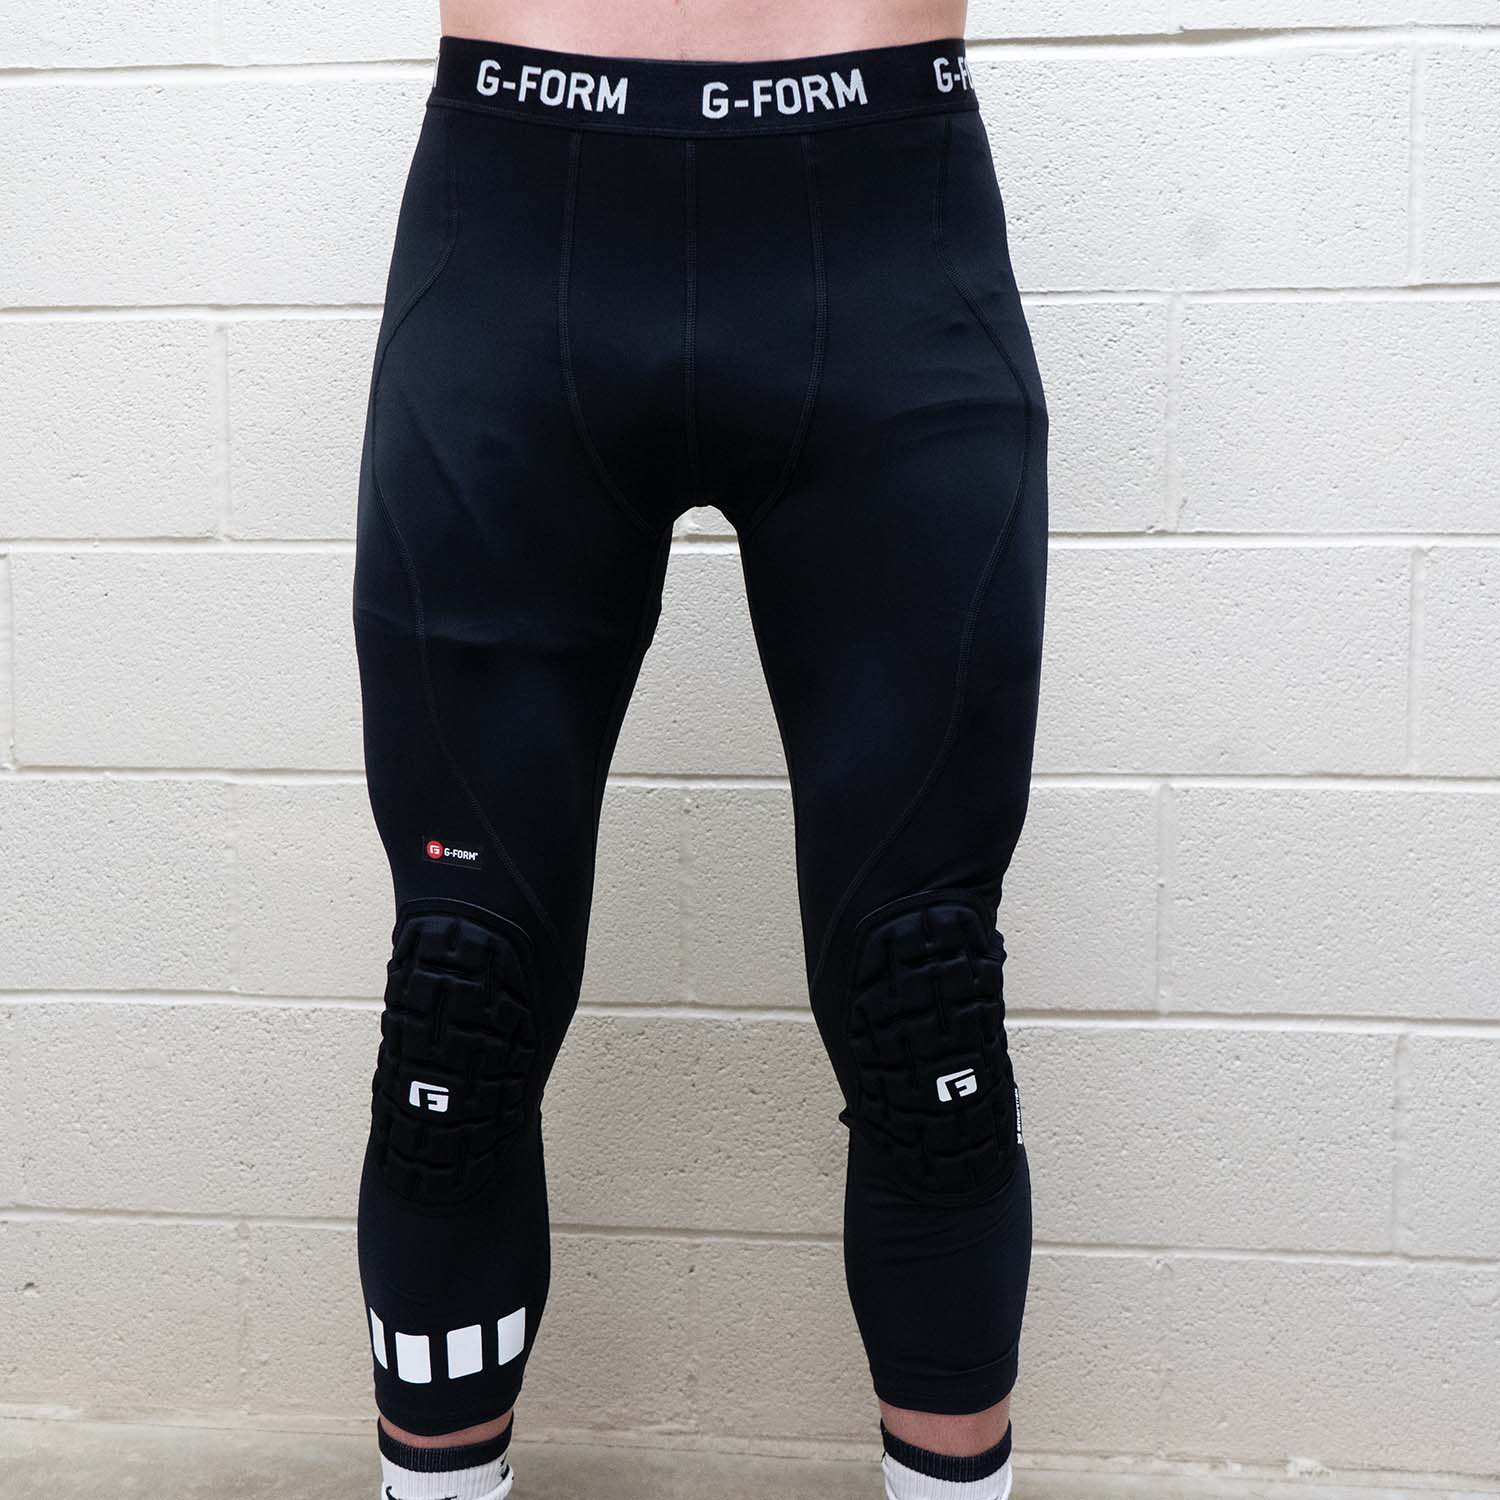 Men's Basketball Sports Tight Pants Compression Workout Knee Pads Bottoms |  eBay